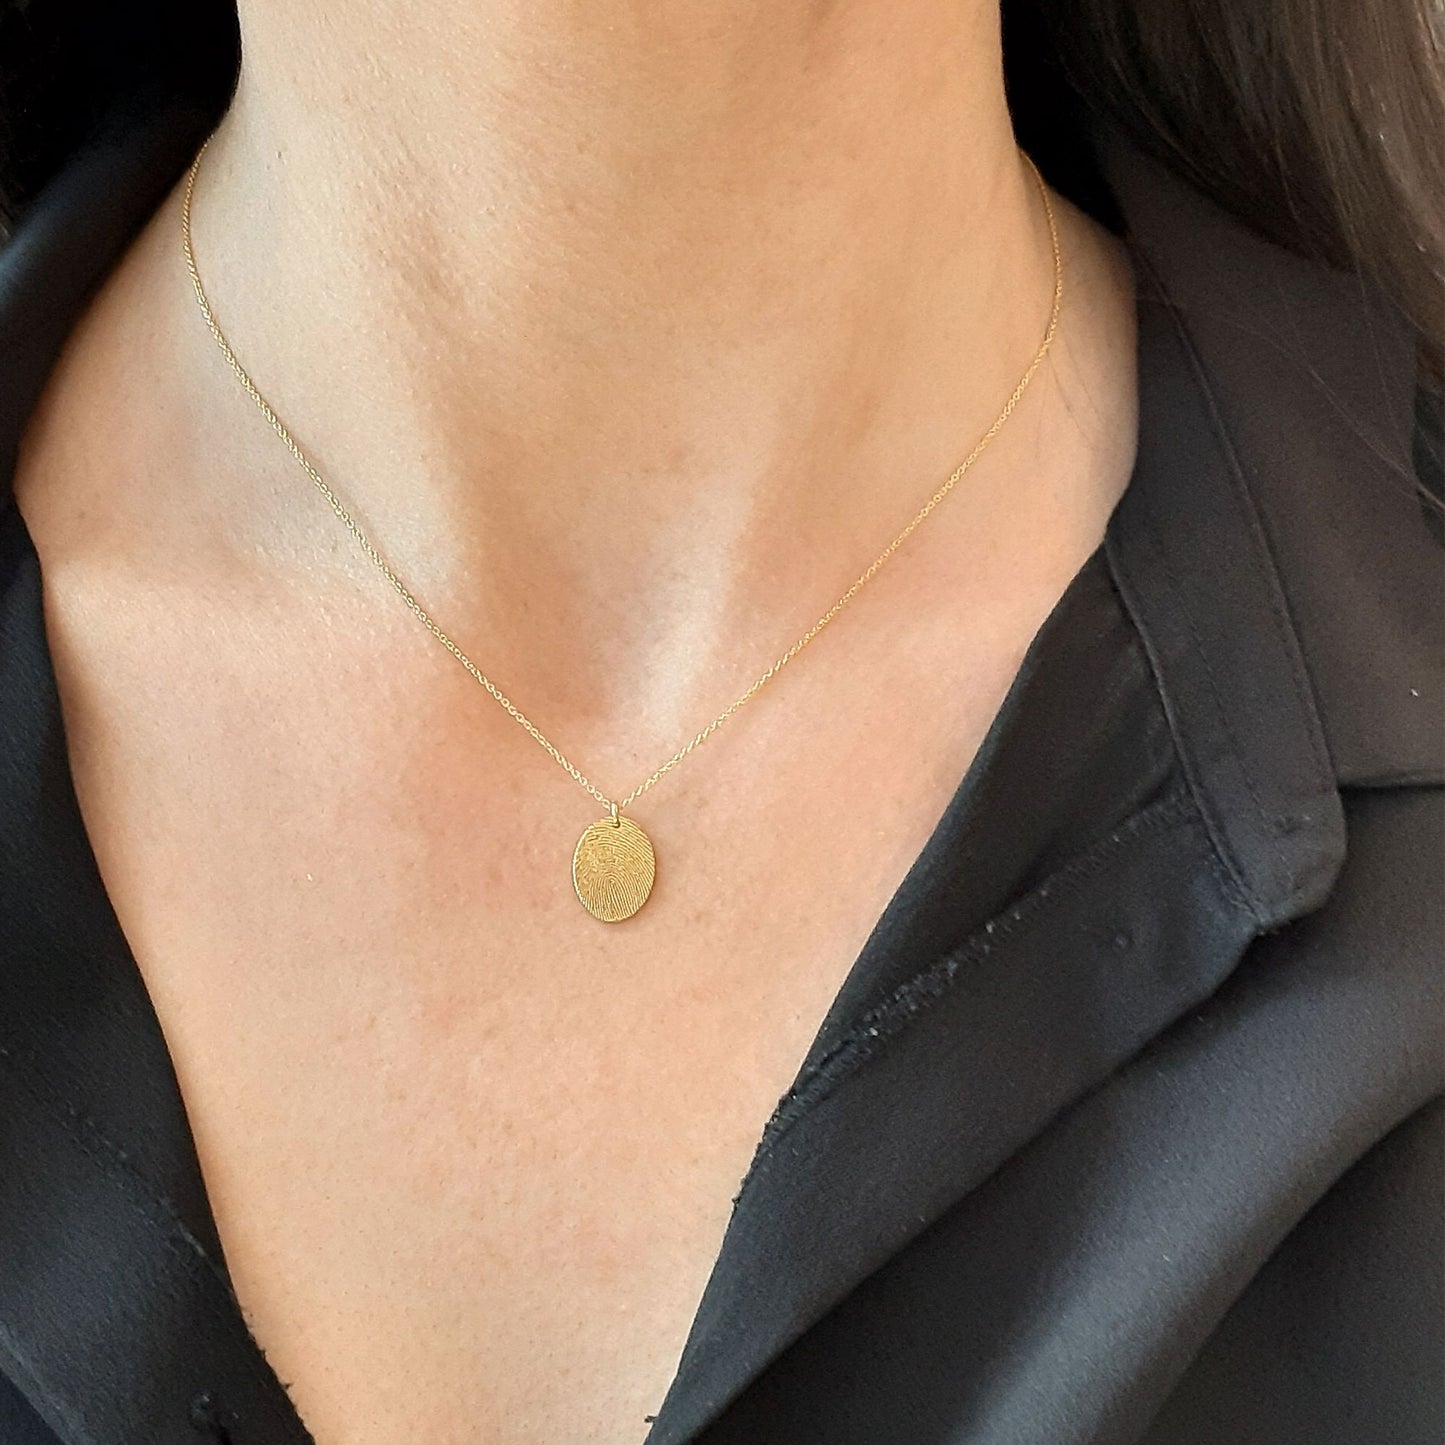 Oval Fingerprint Necklace , Handwriting Necklace , Memorial Necklace , Signature Necklace , Thumbprint Necklace , 14k gold necklace gift